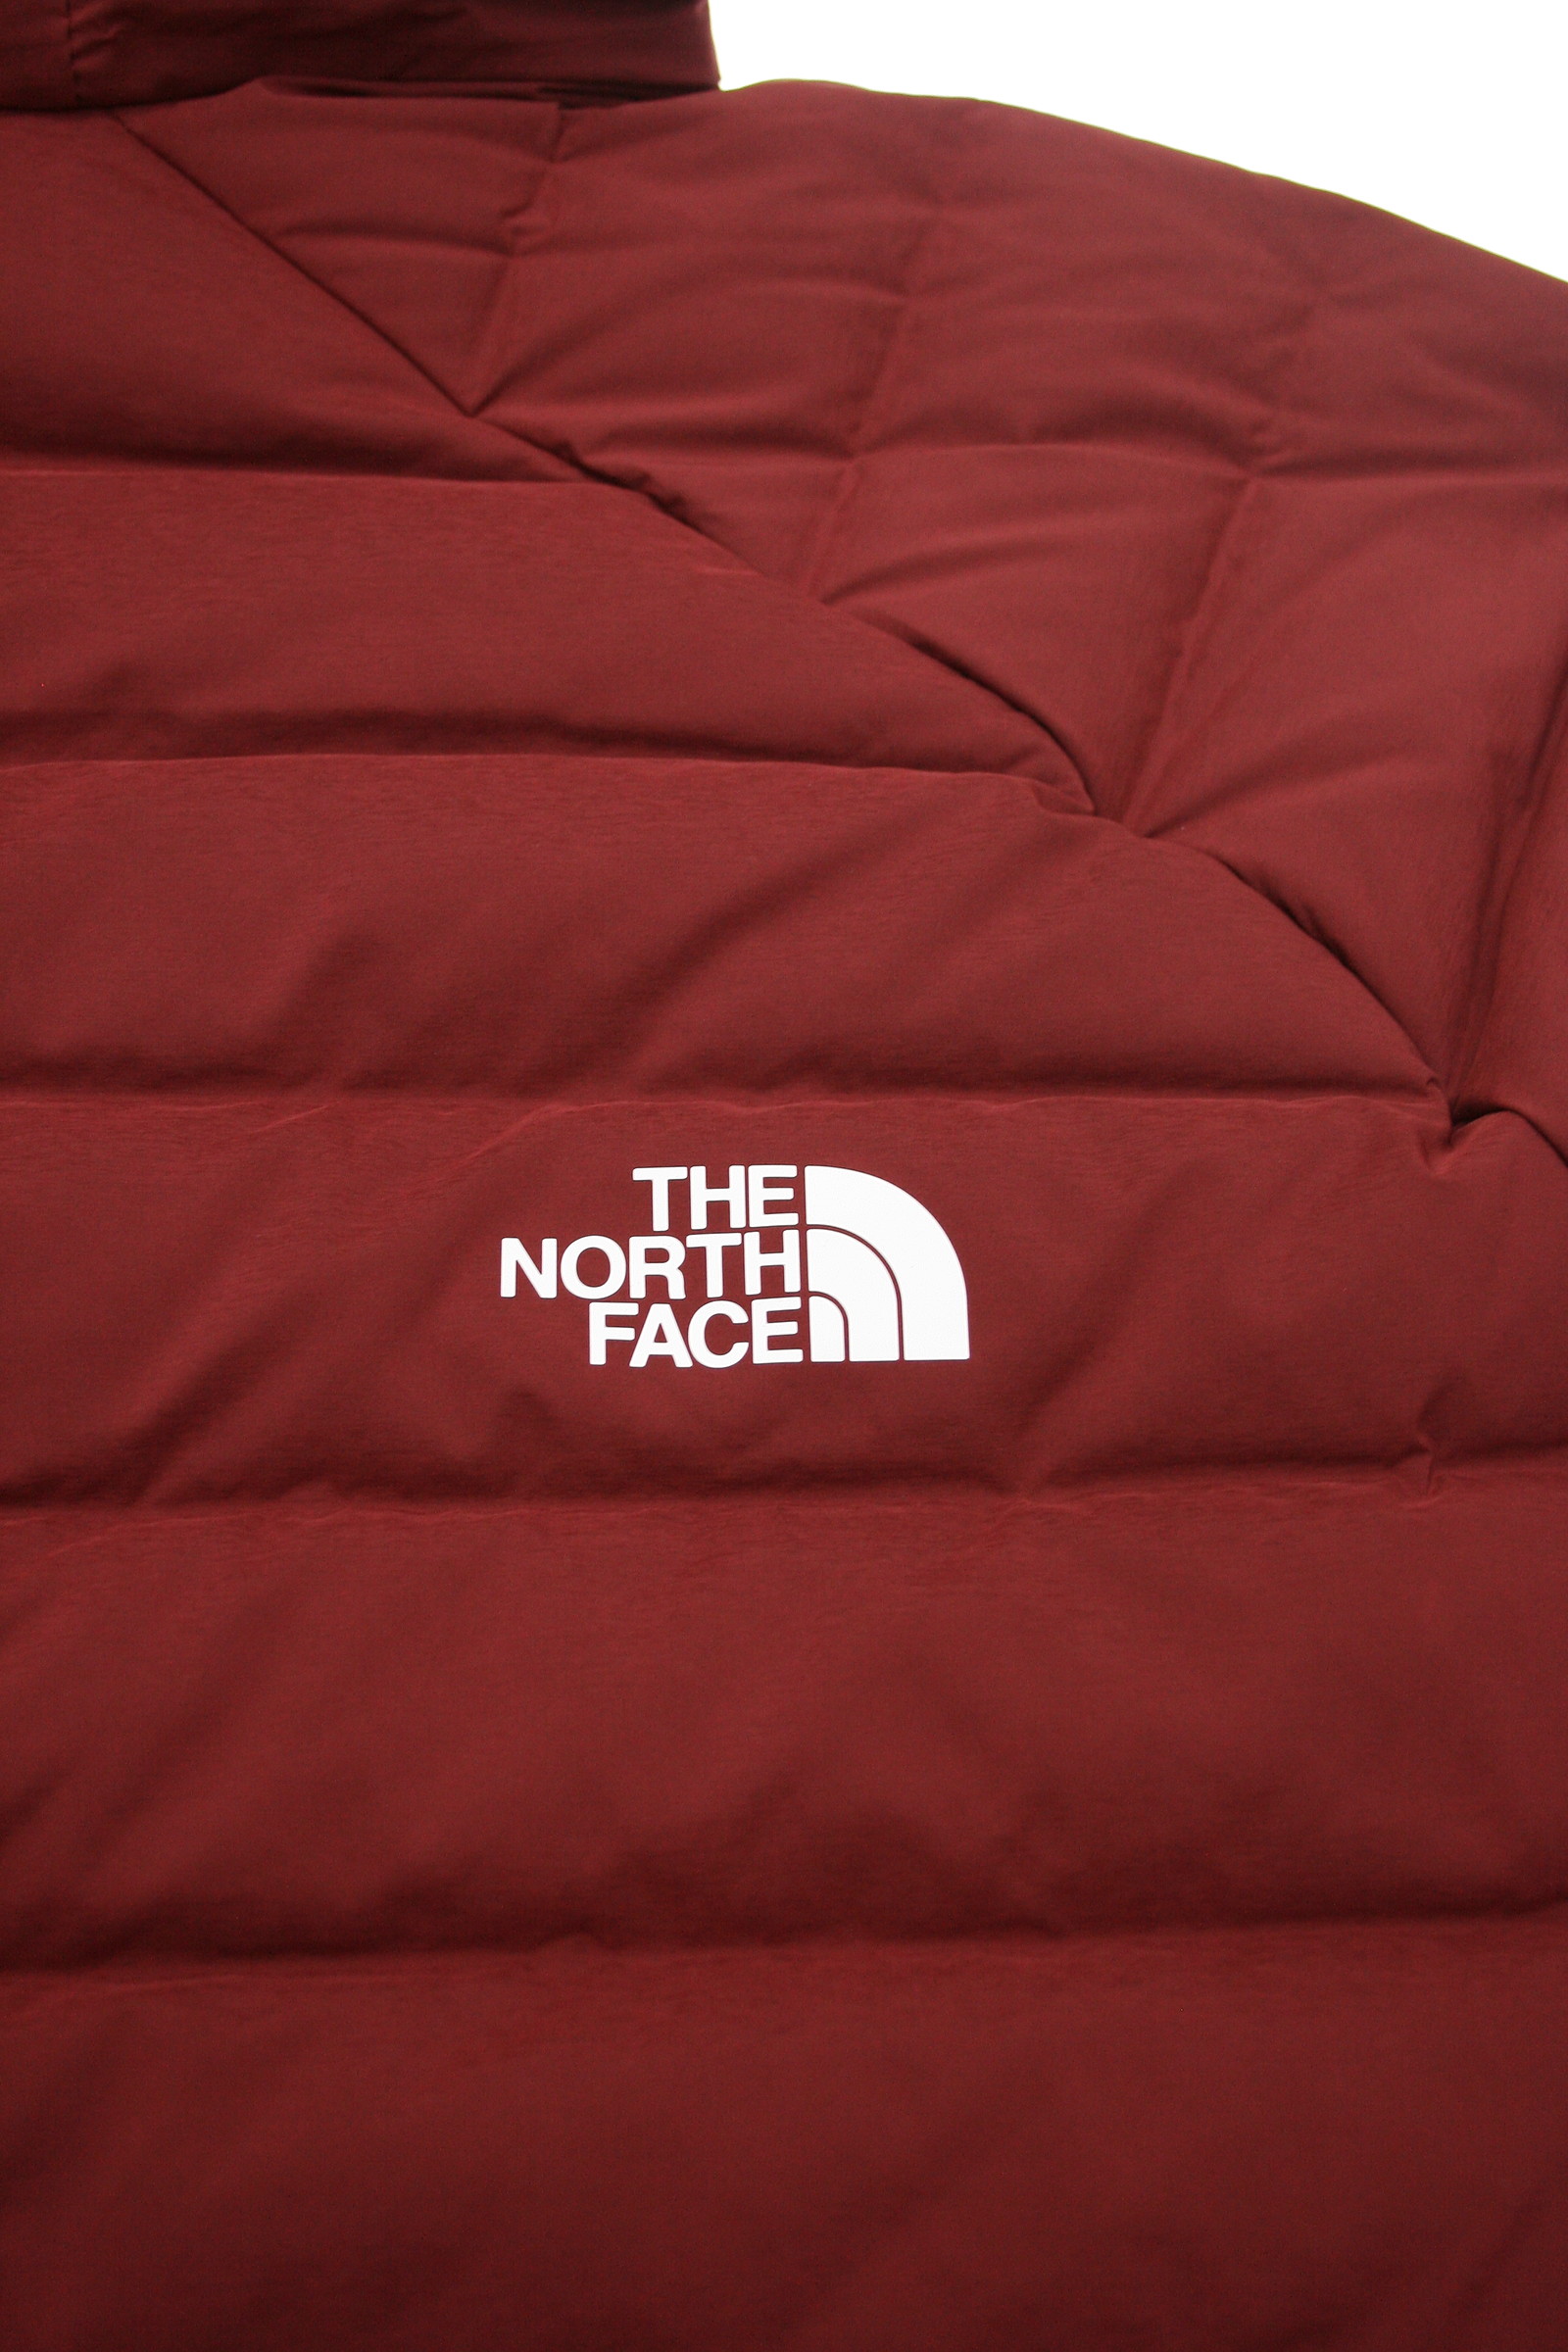 The North Face Belleview Stretch Men's 600 Fill Insulated Jacket $280